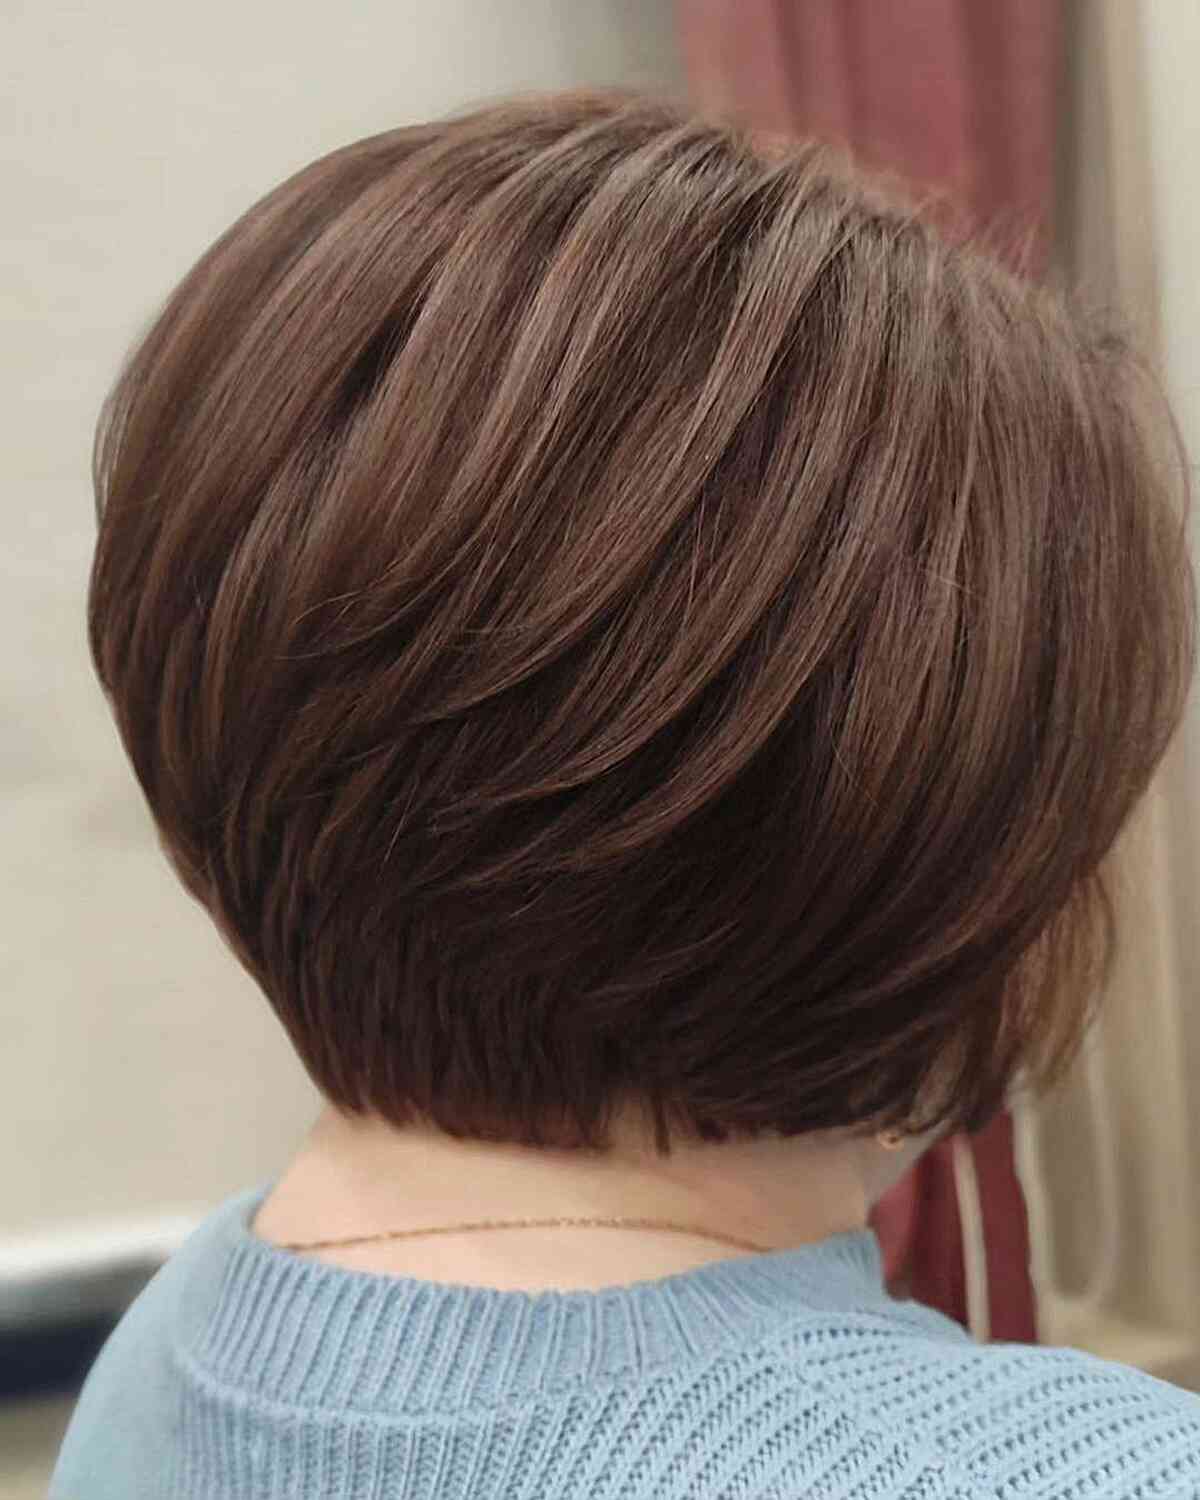 Short Brunette Hair with Visible Layering